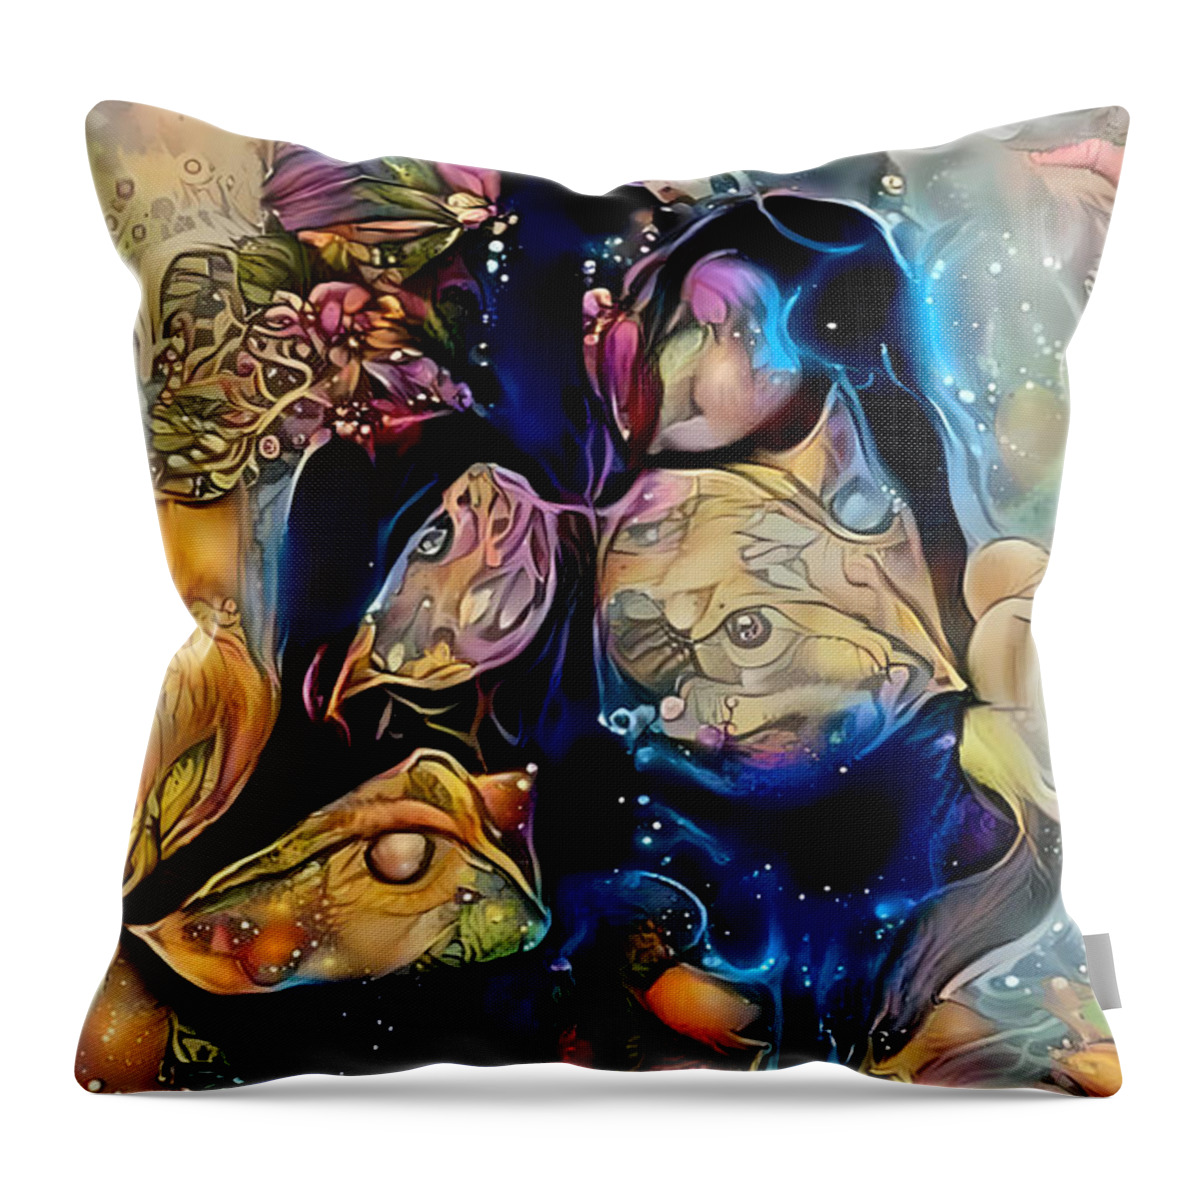 Contemporary Art Throw Pillow featuring the digital art 43 by Jeremiah Ray